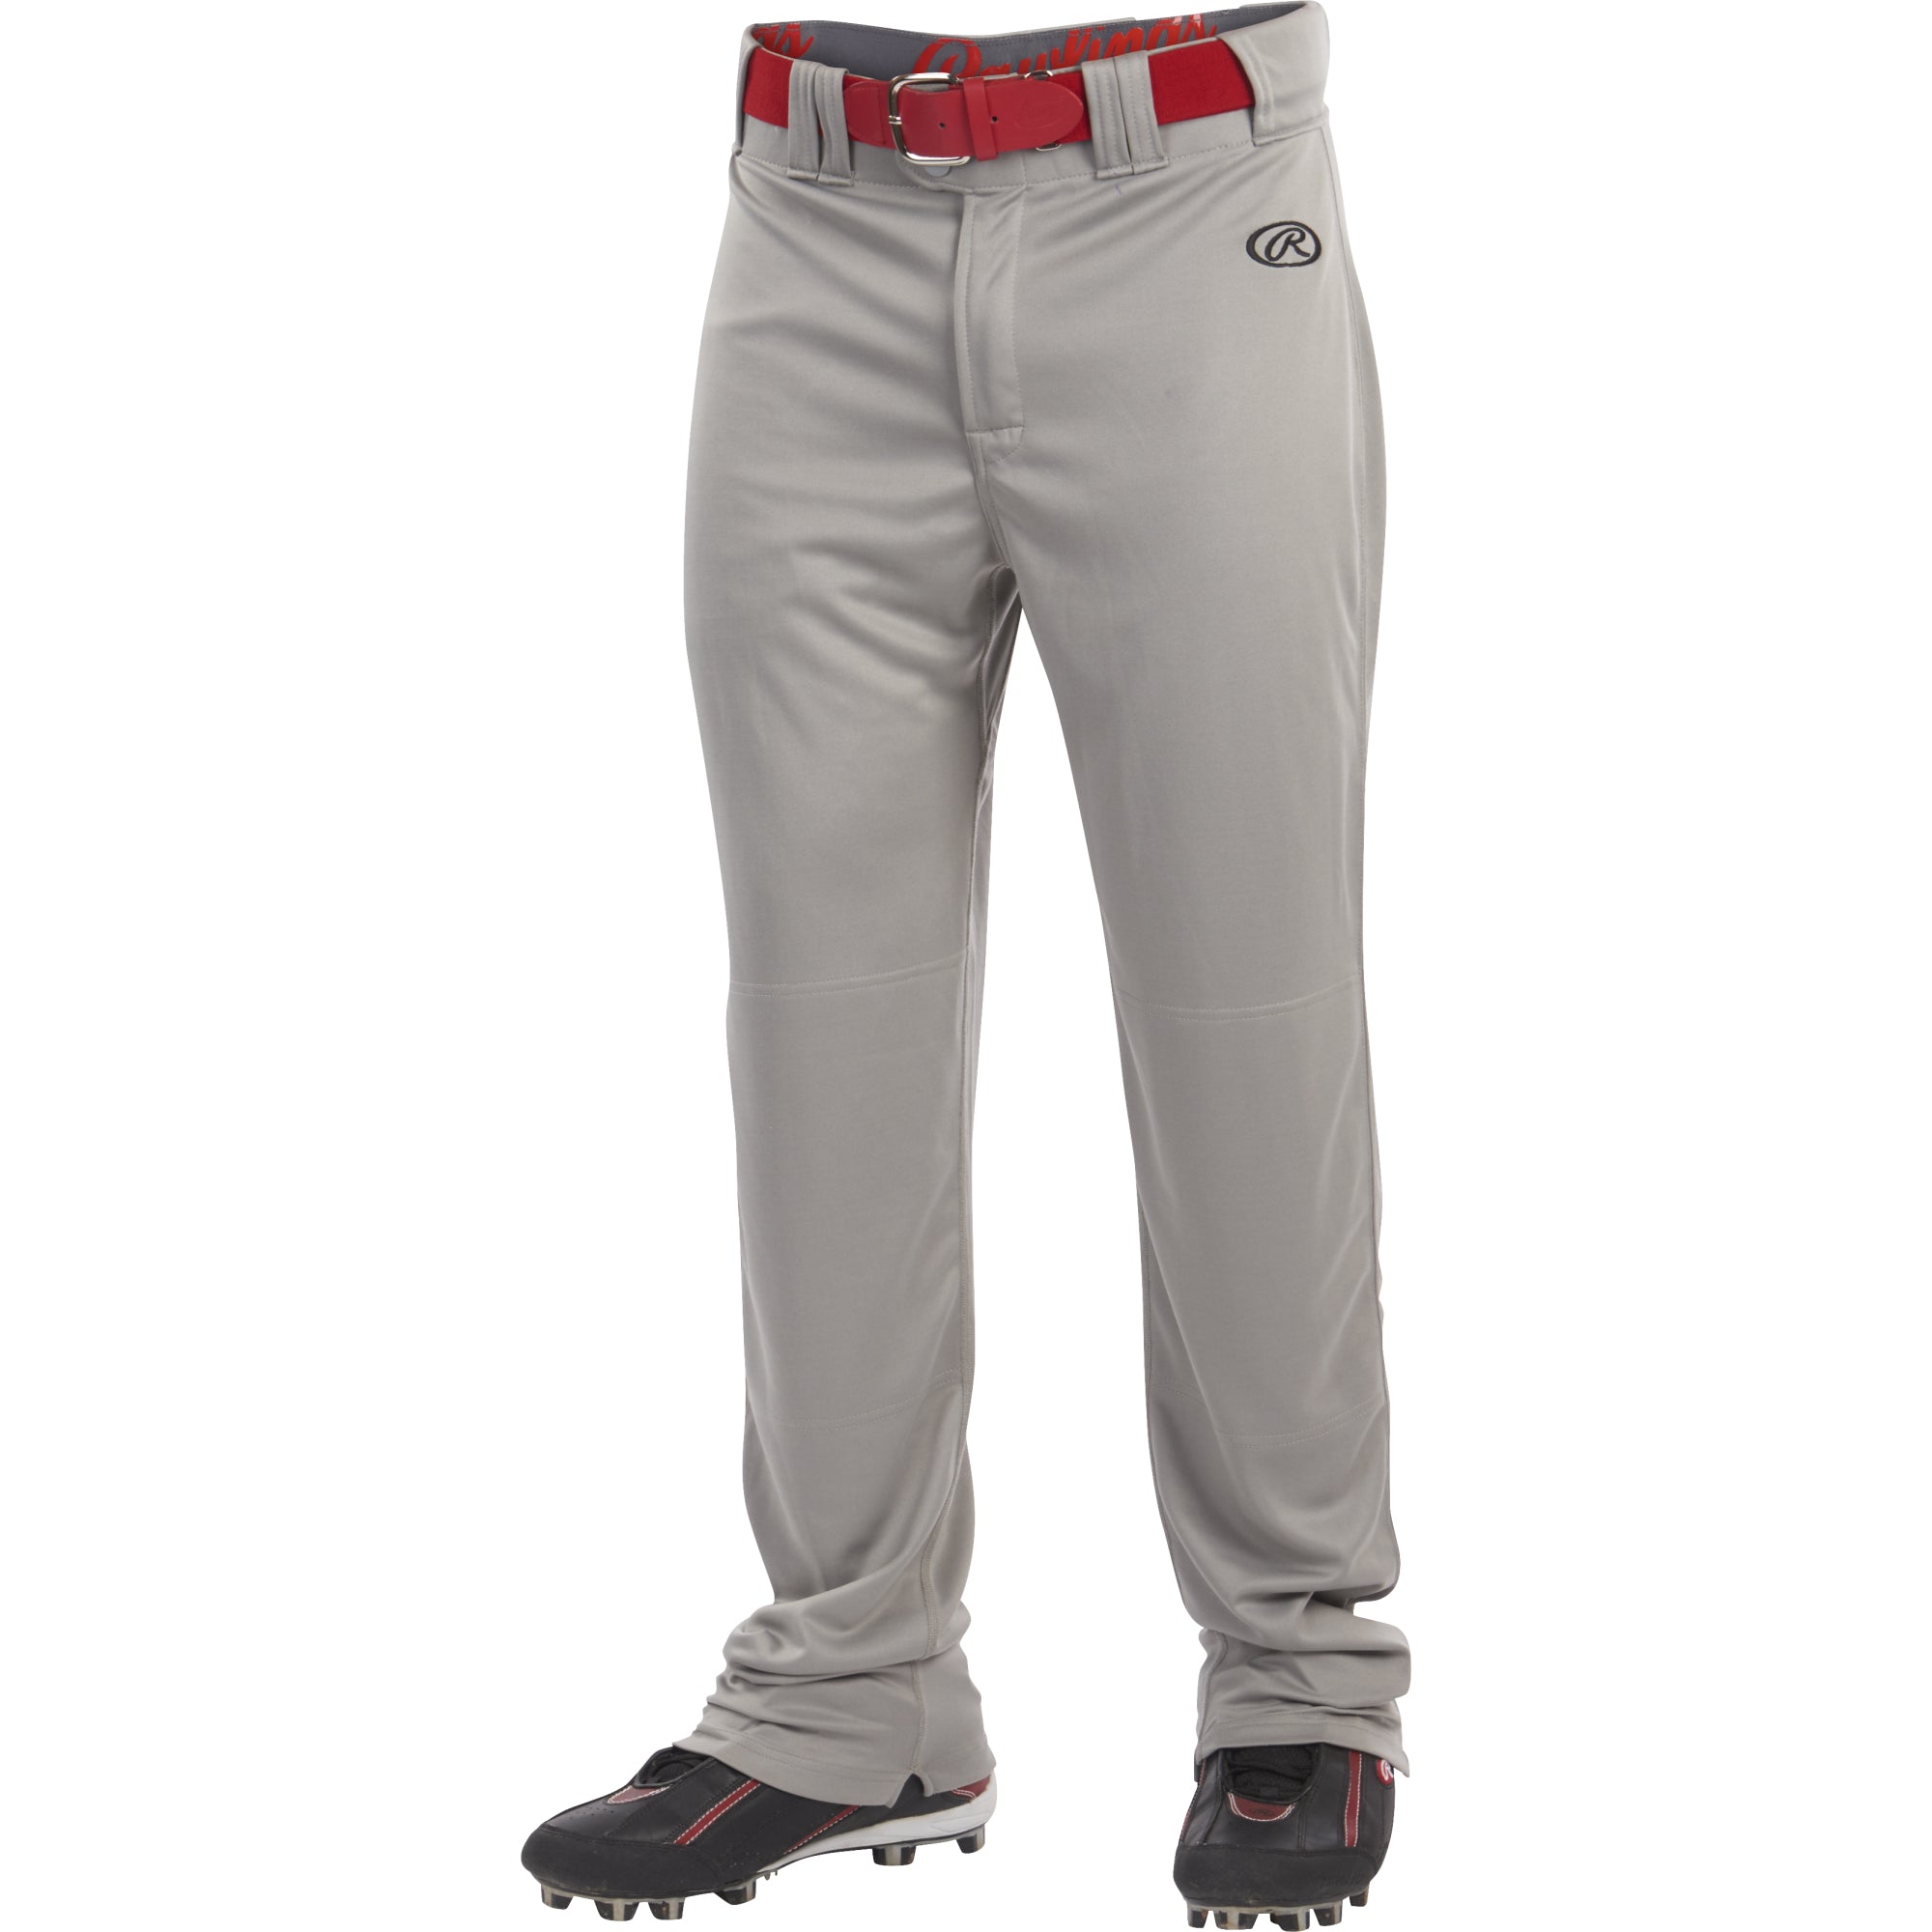 Rawlings Launch Pant Youth